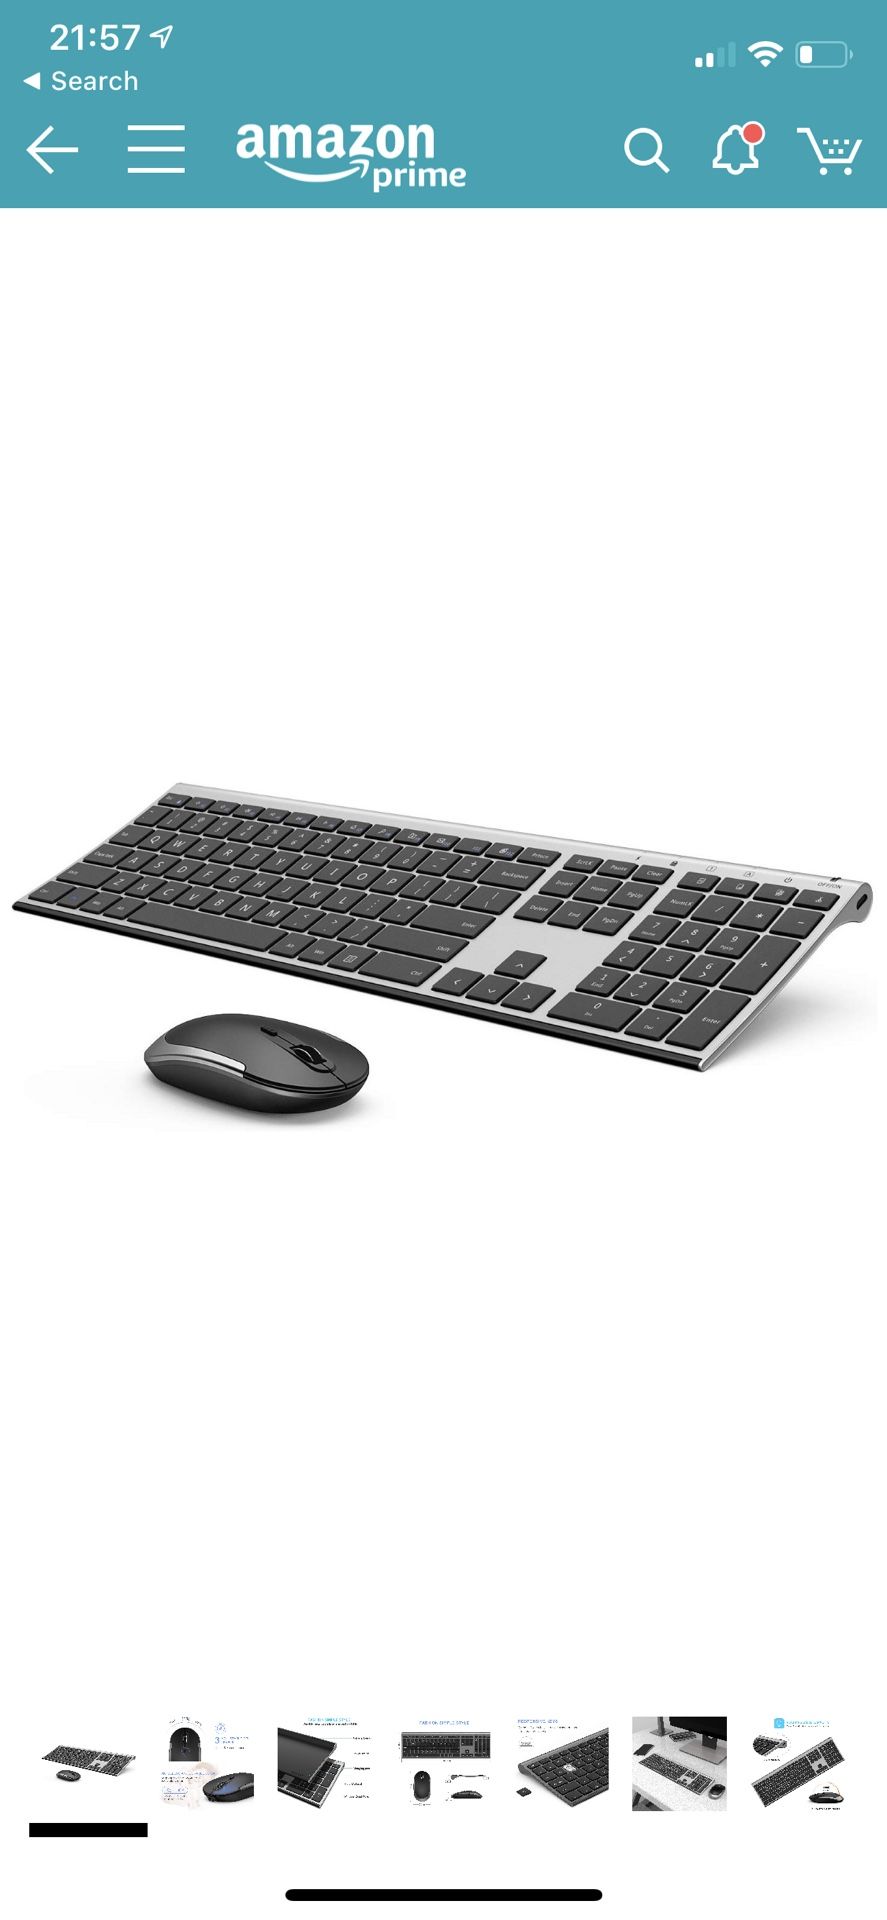 Wireless keyboard and mouse with keyboard cover